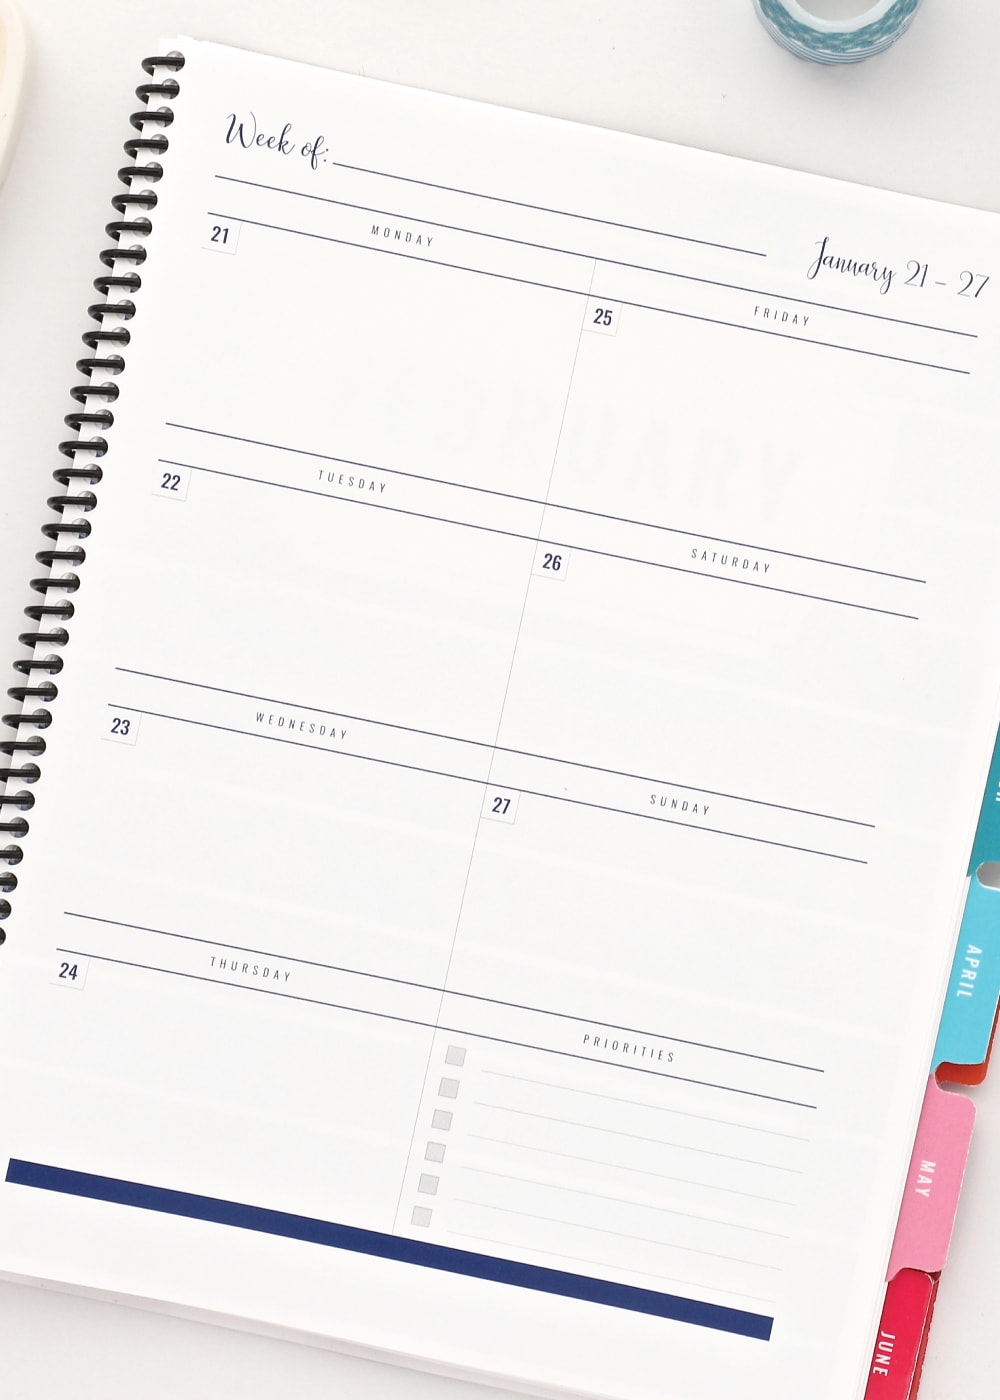 These editable, changeable. mix-&-match Printable Planner Pages (featuring daily, weekly and monthly options!) provide ultimate flexibility for your planning needs!